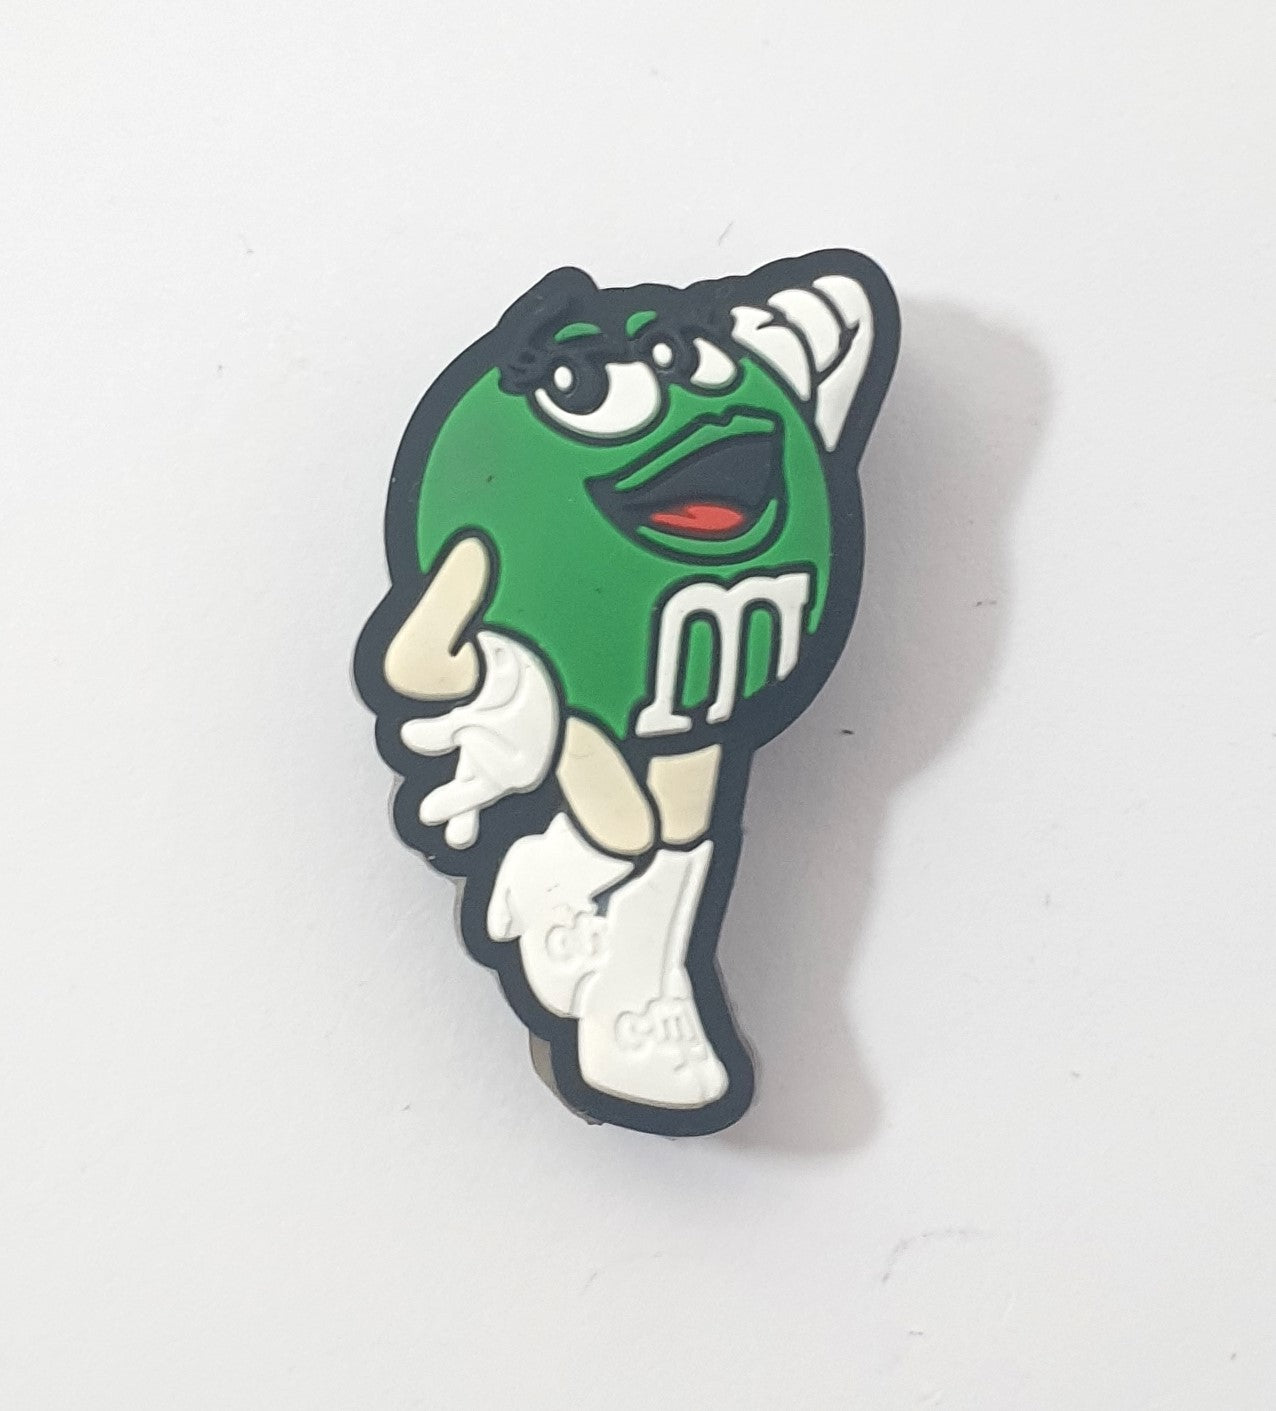 M & M Focal Silicone bead. Can fit on pen.